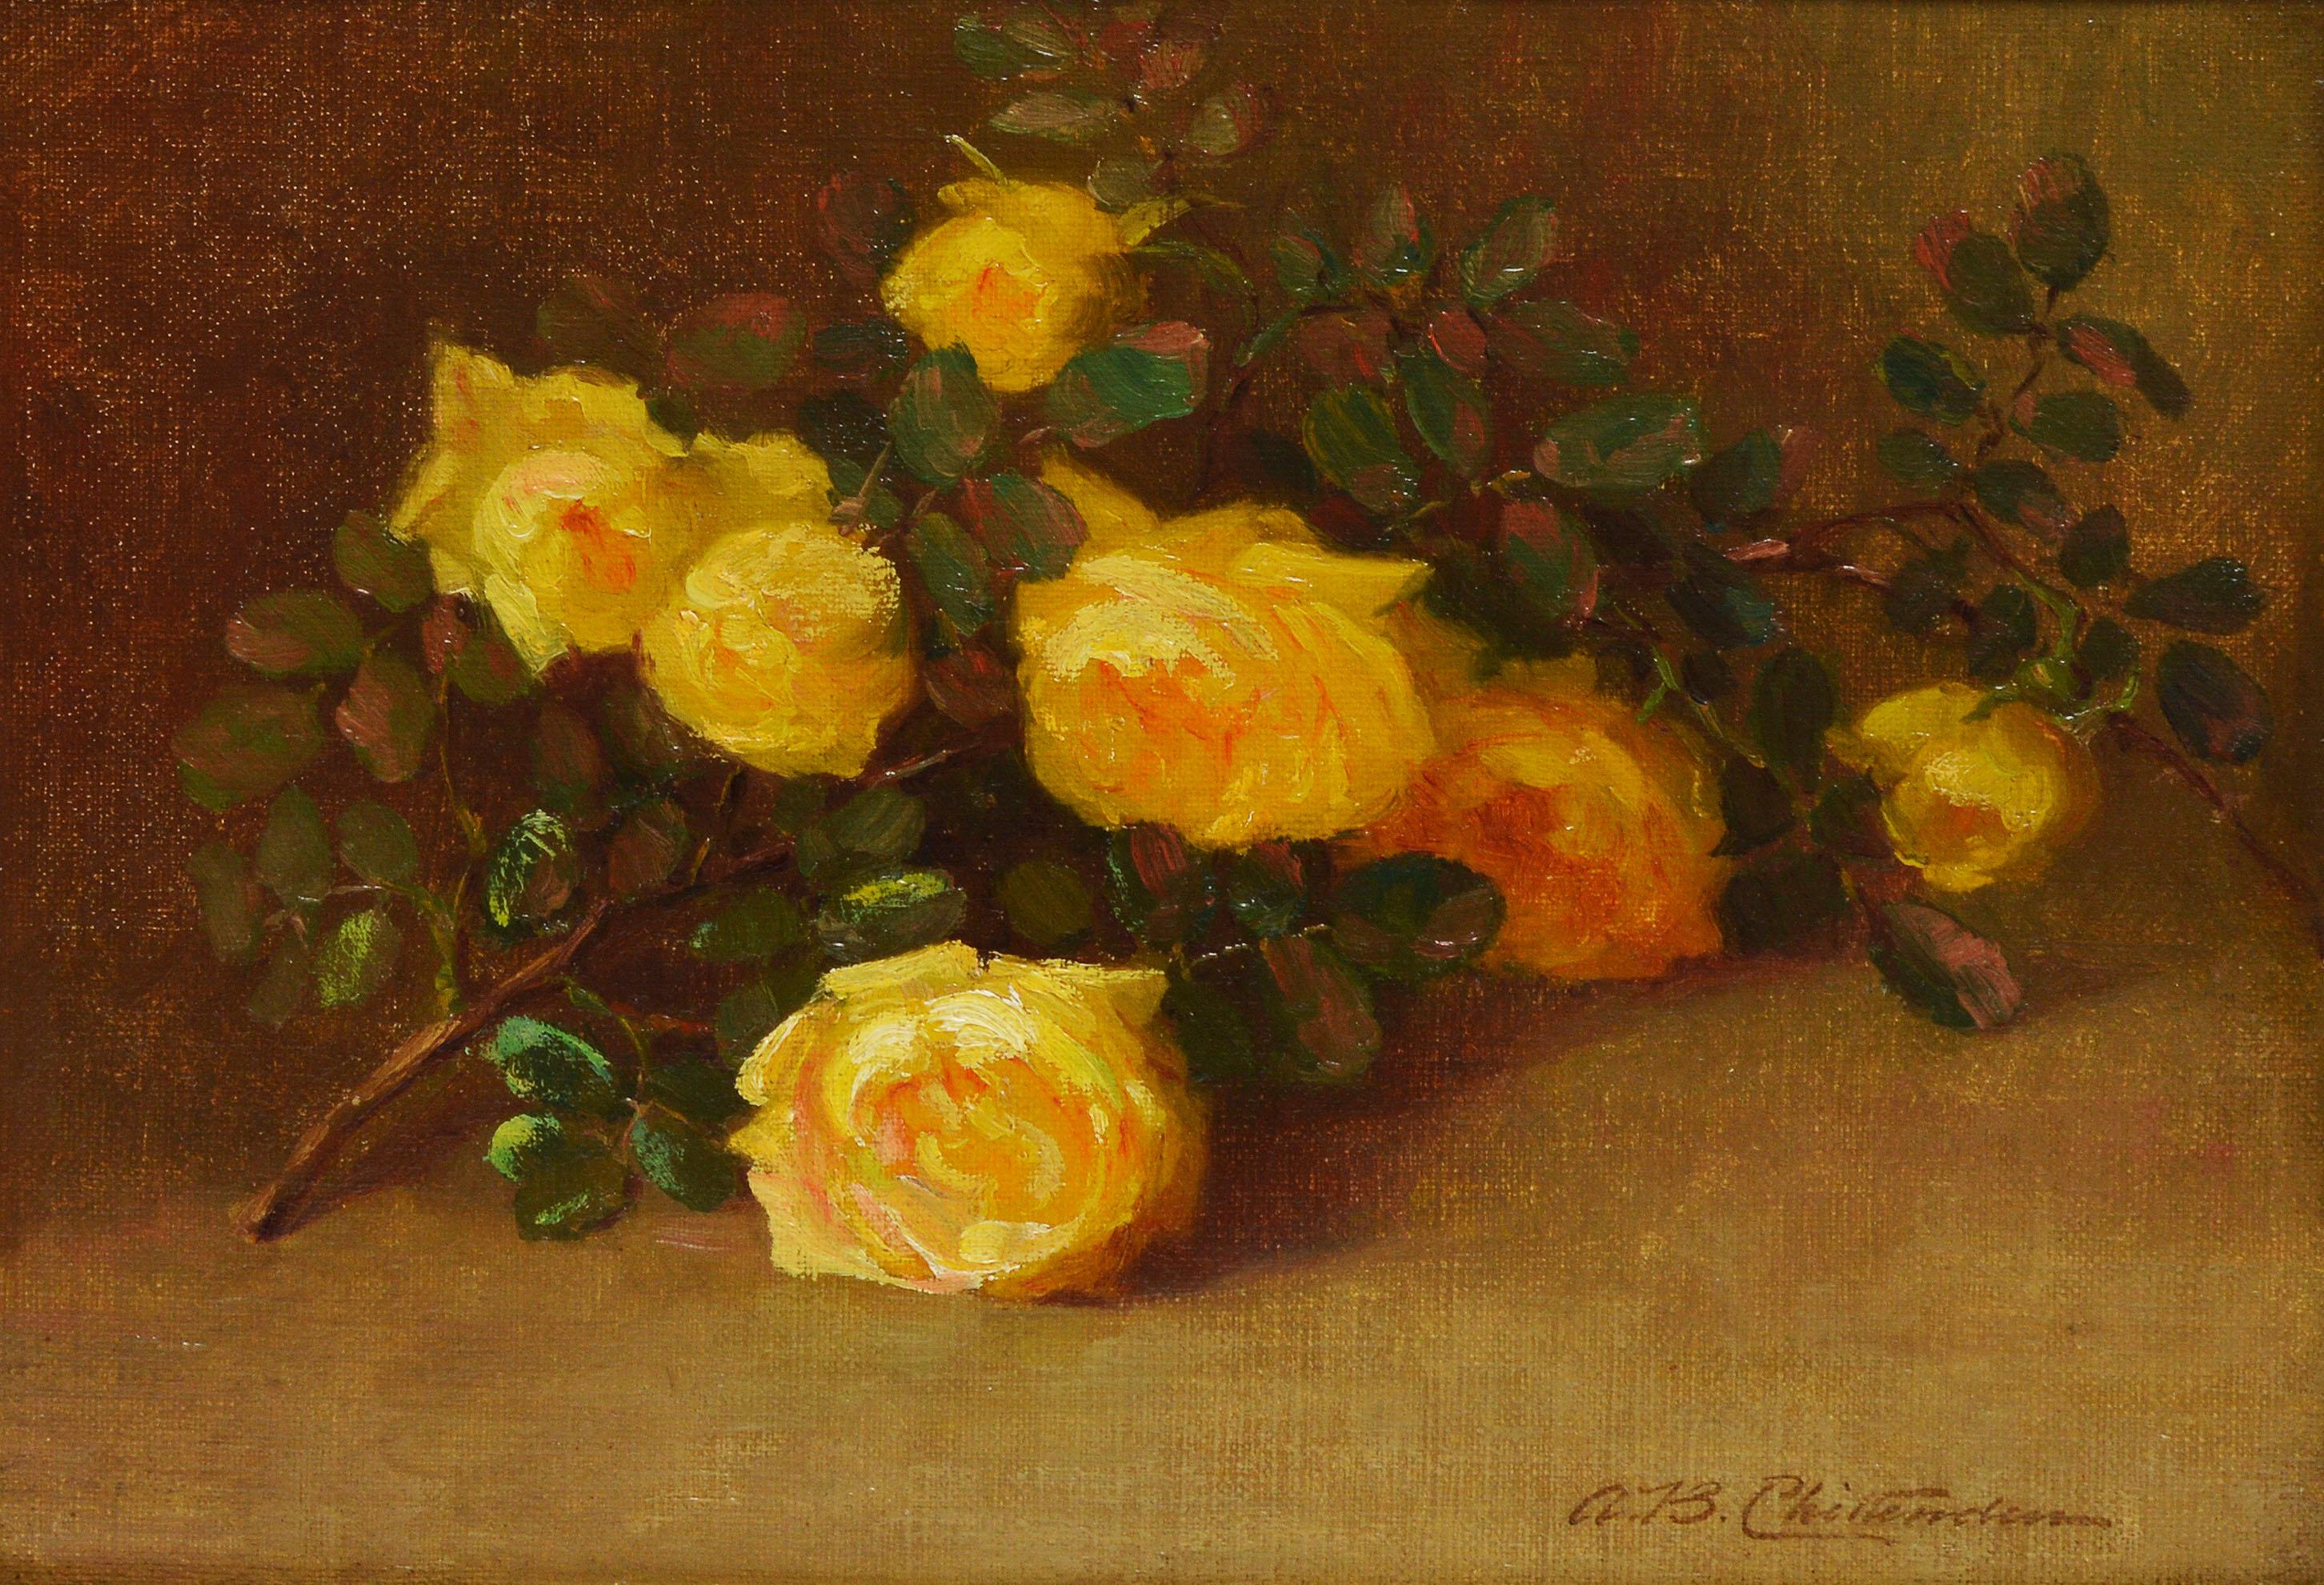 Impressionist view of yellow roses by Alice Brown Chittenden  (1859 - 1944).  Oil on board, circa 1900.  Signed lower right.  Displayed in a giltwood frame.  Image size, 14